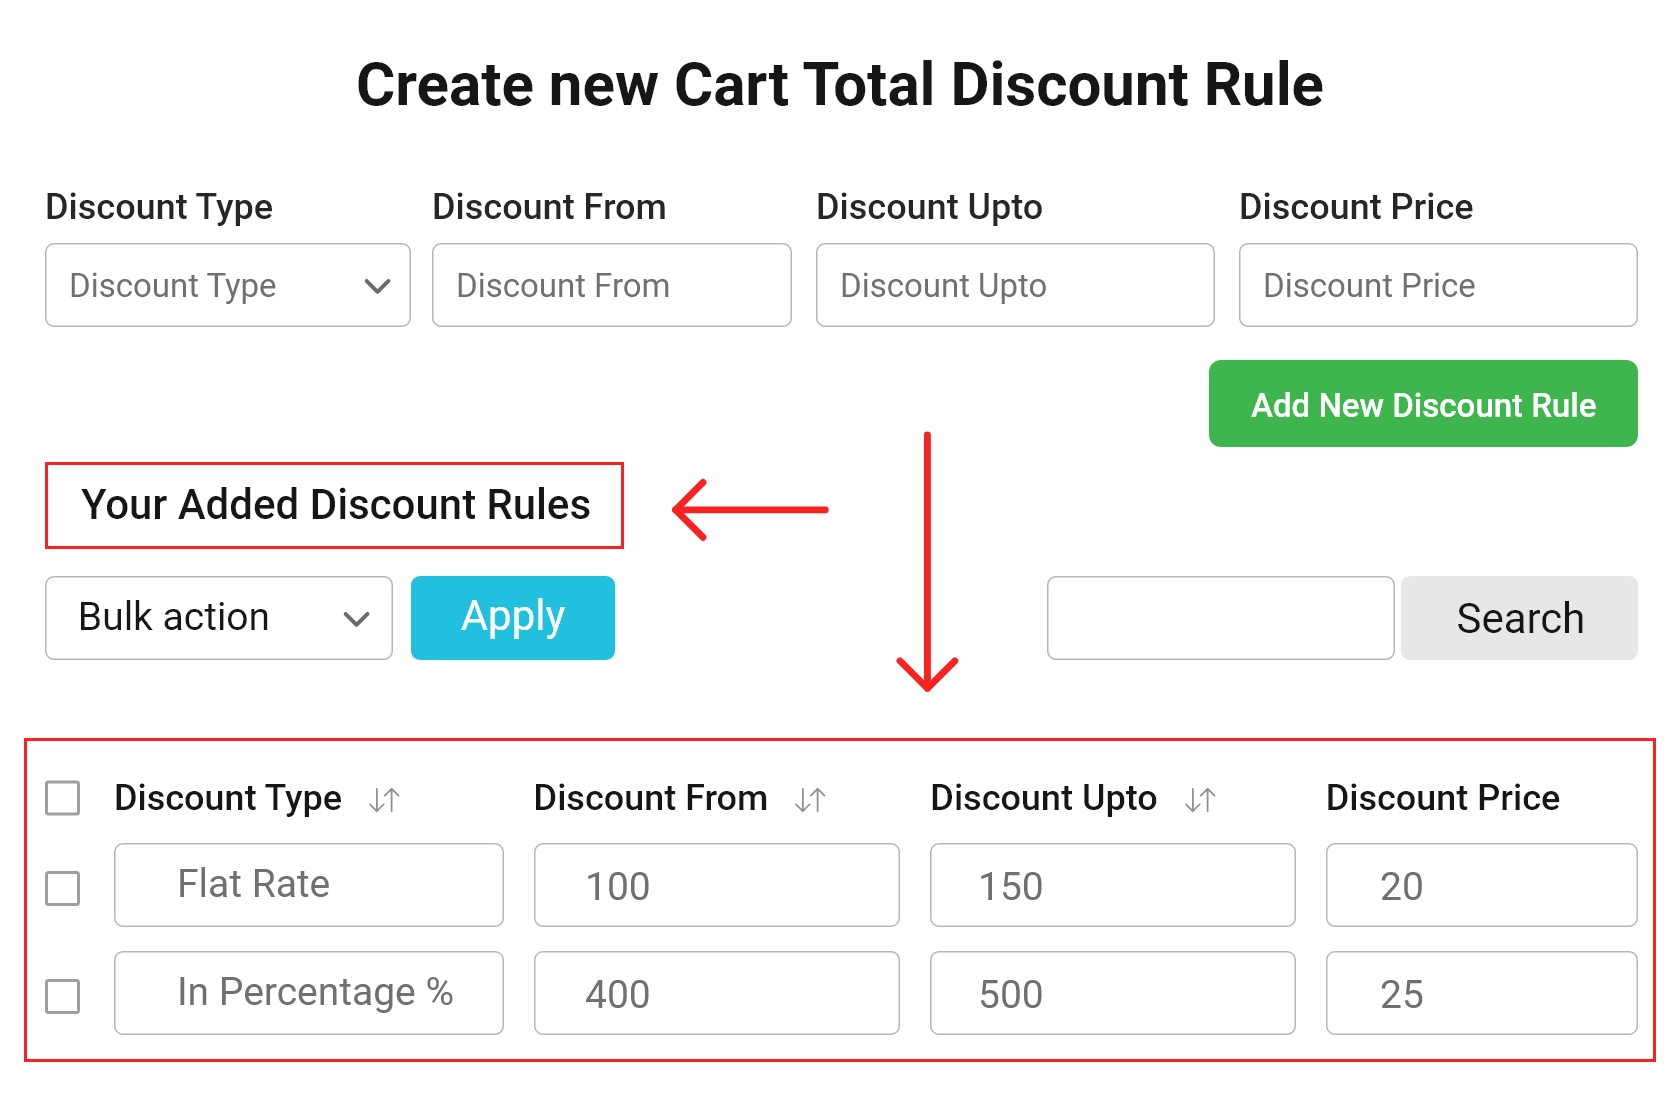 View all discount rules in a single page